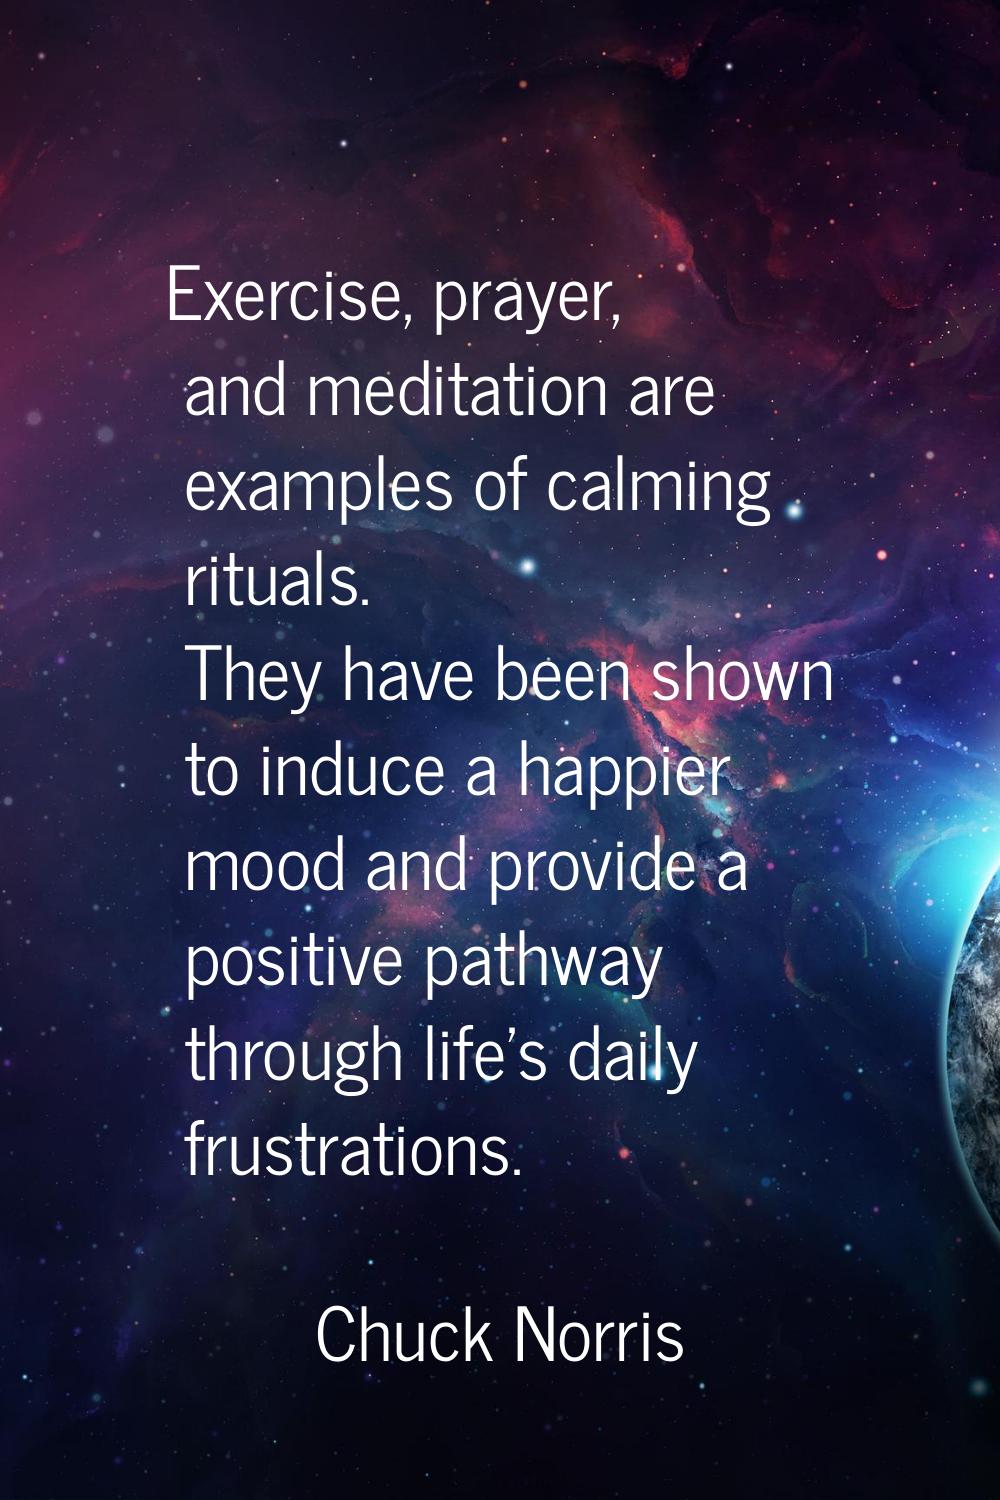 Exercise, prayer, and meditation are examples of calming rituals. They have been shown to induce a 